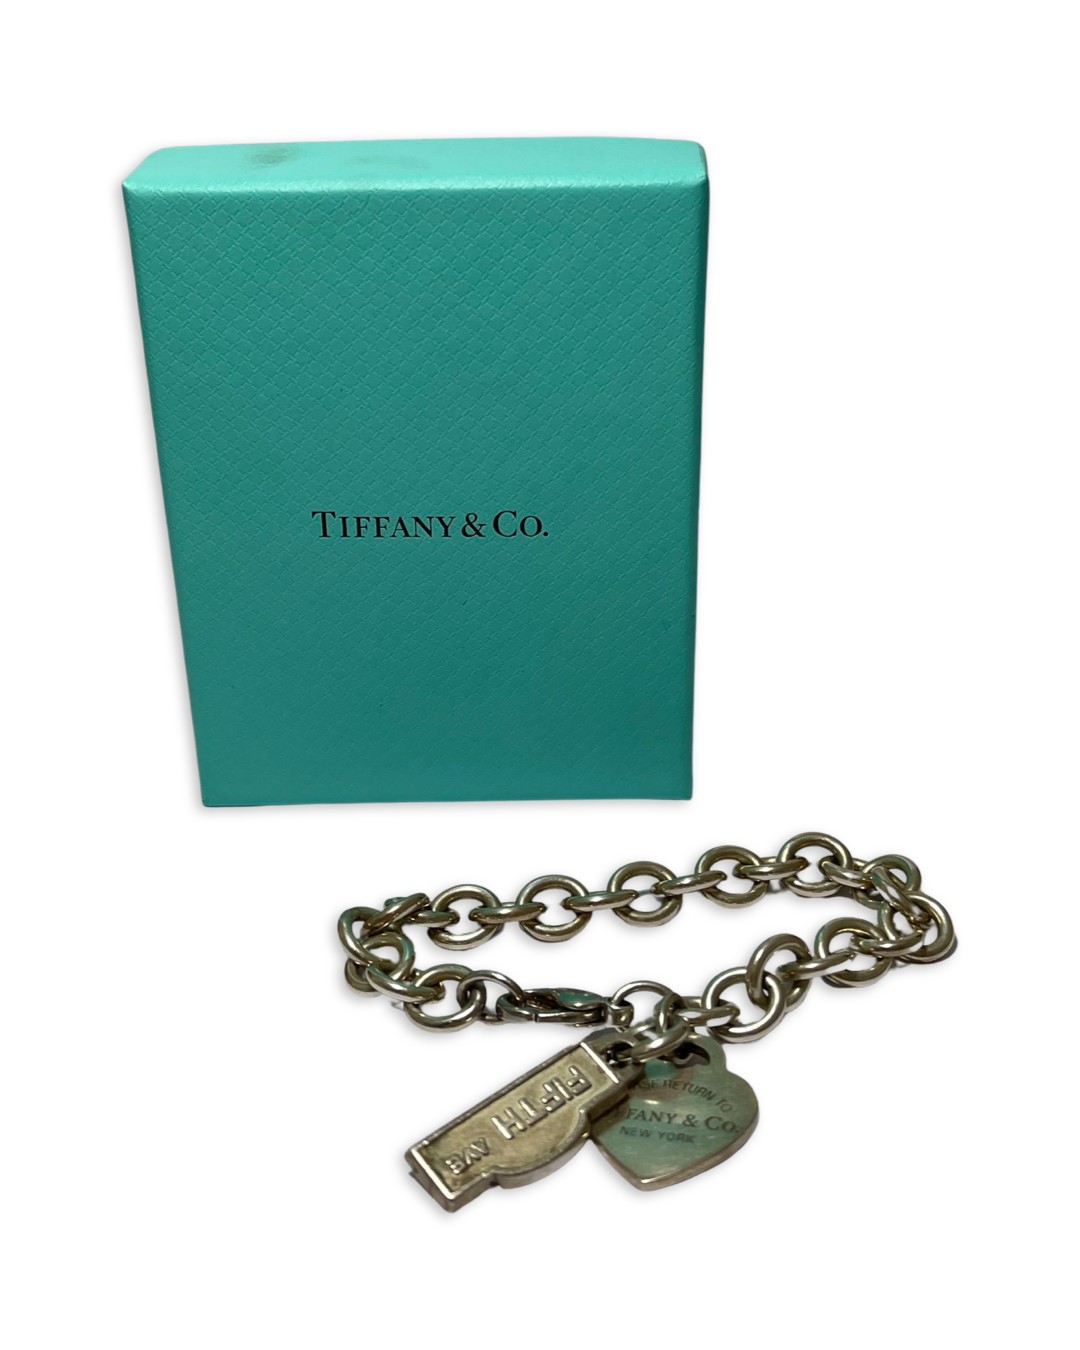 Tiffany & Co. Silver 'Return To Tiffany' Bracelet weighing 41.28 grams and measuring 18.5cm in